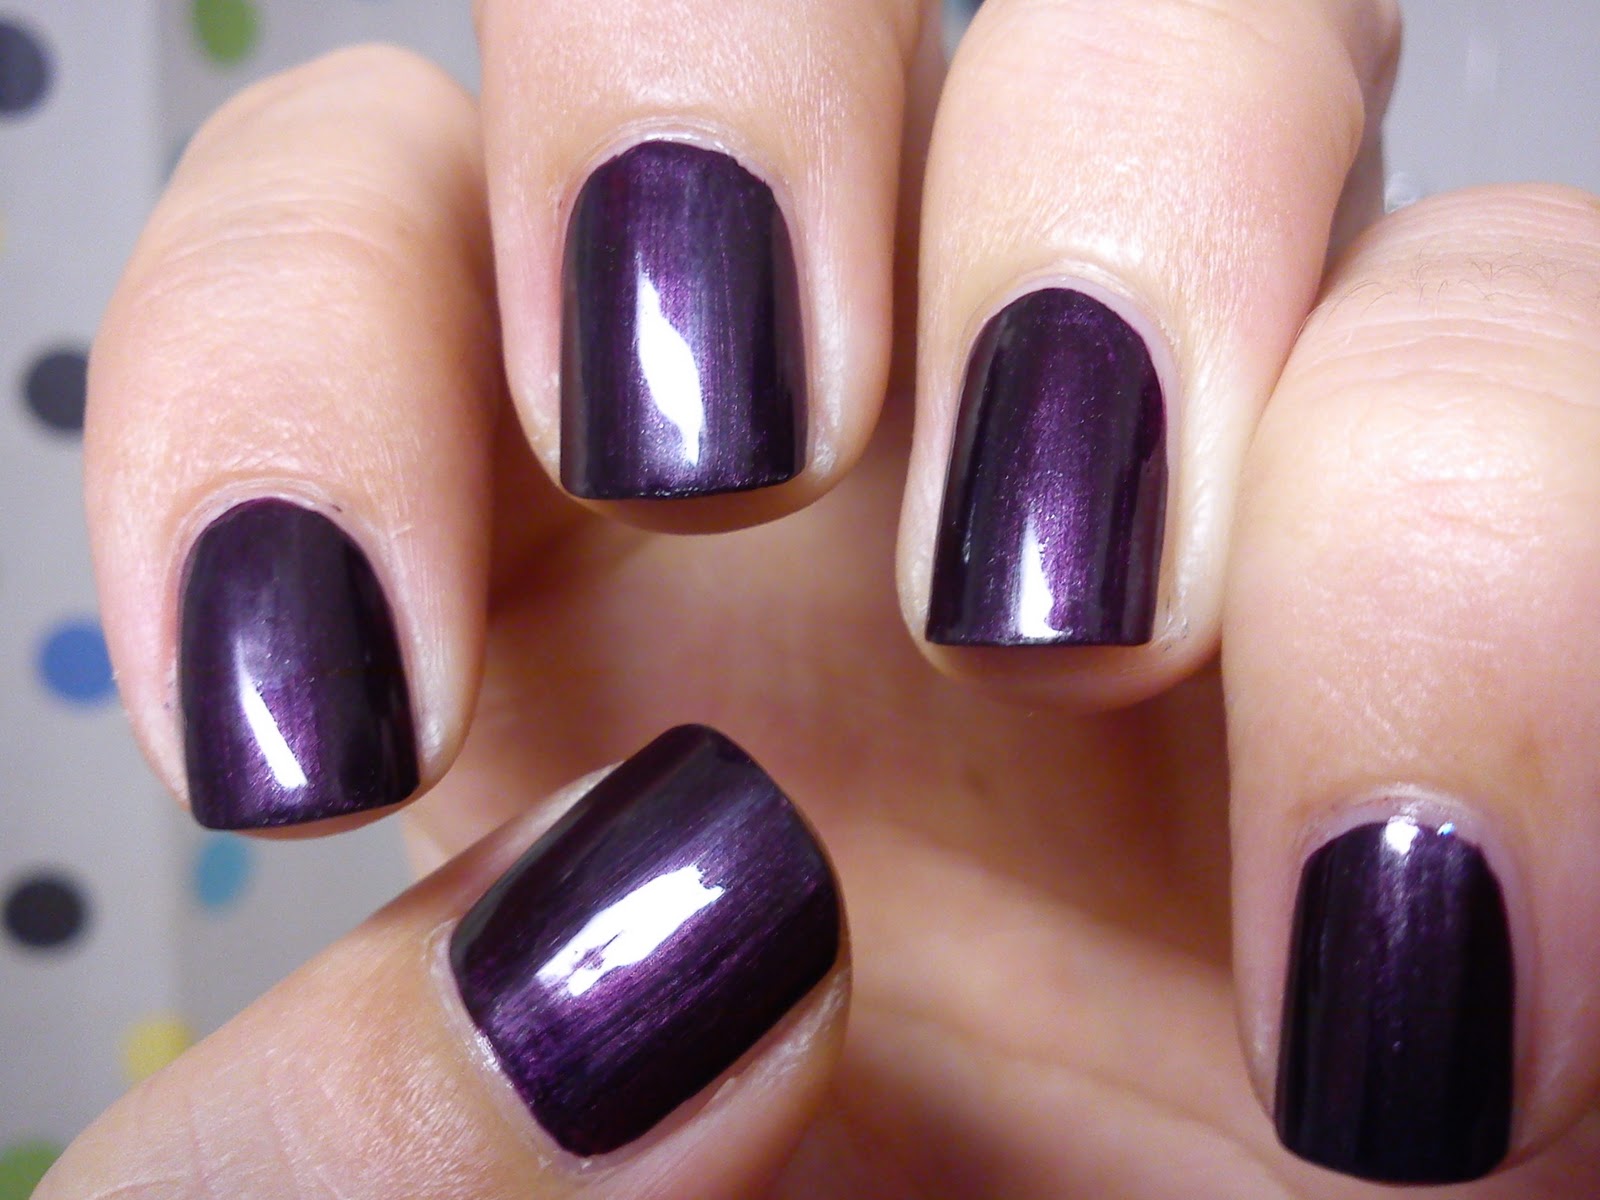 OPI Nail Lacquer in "Lincoln Park at Midnight" - wide 1